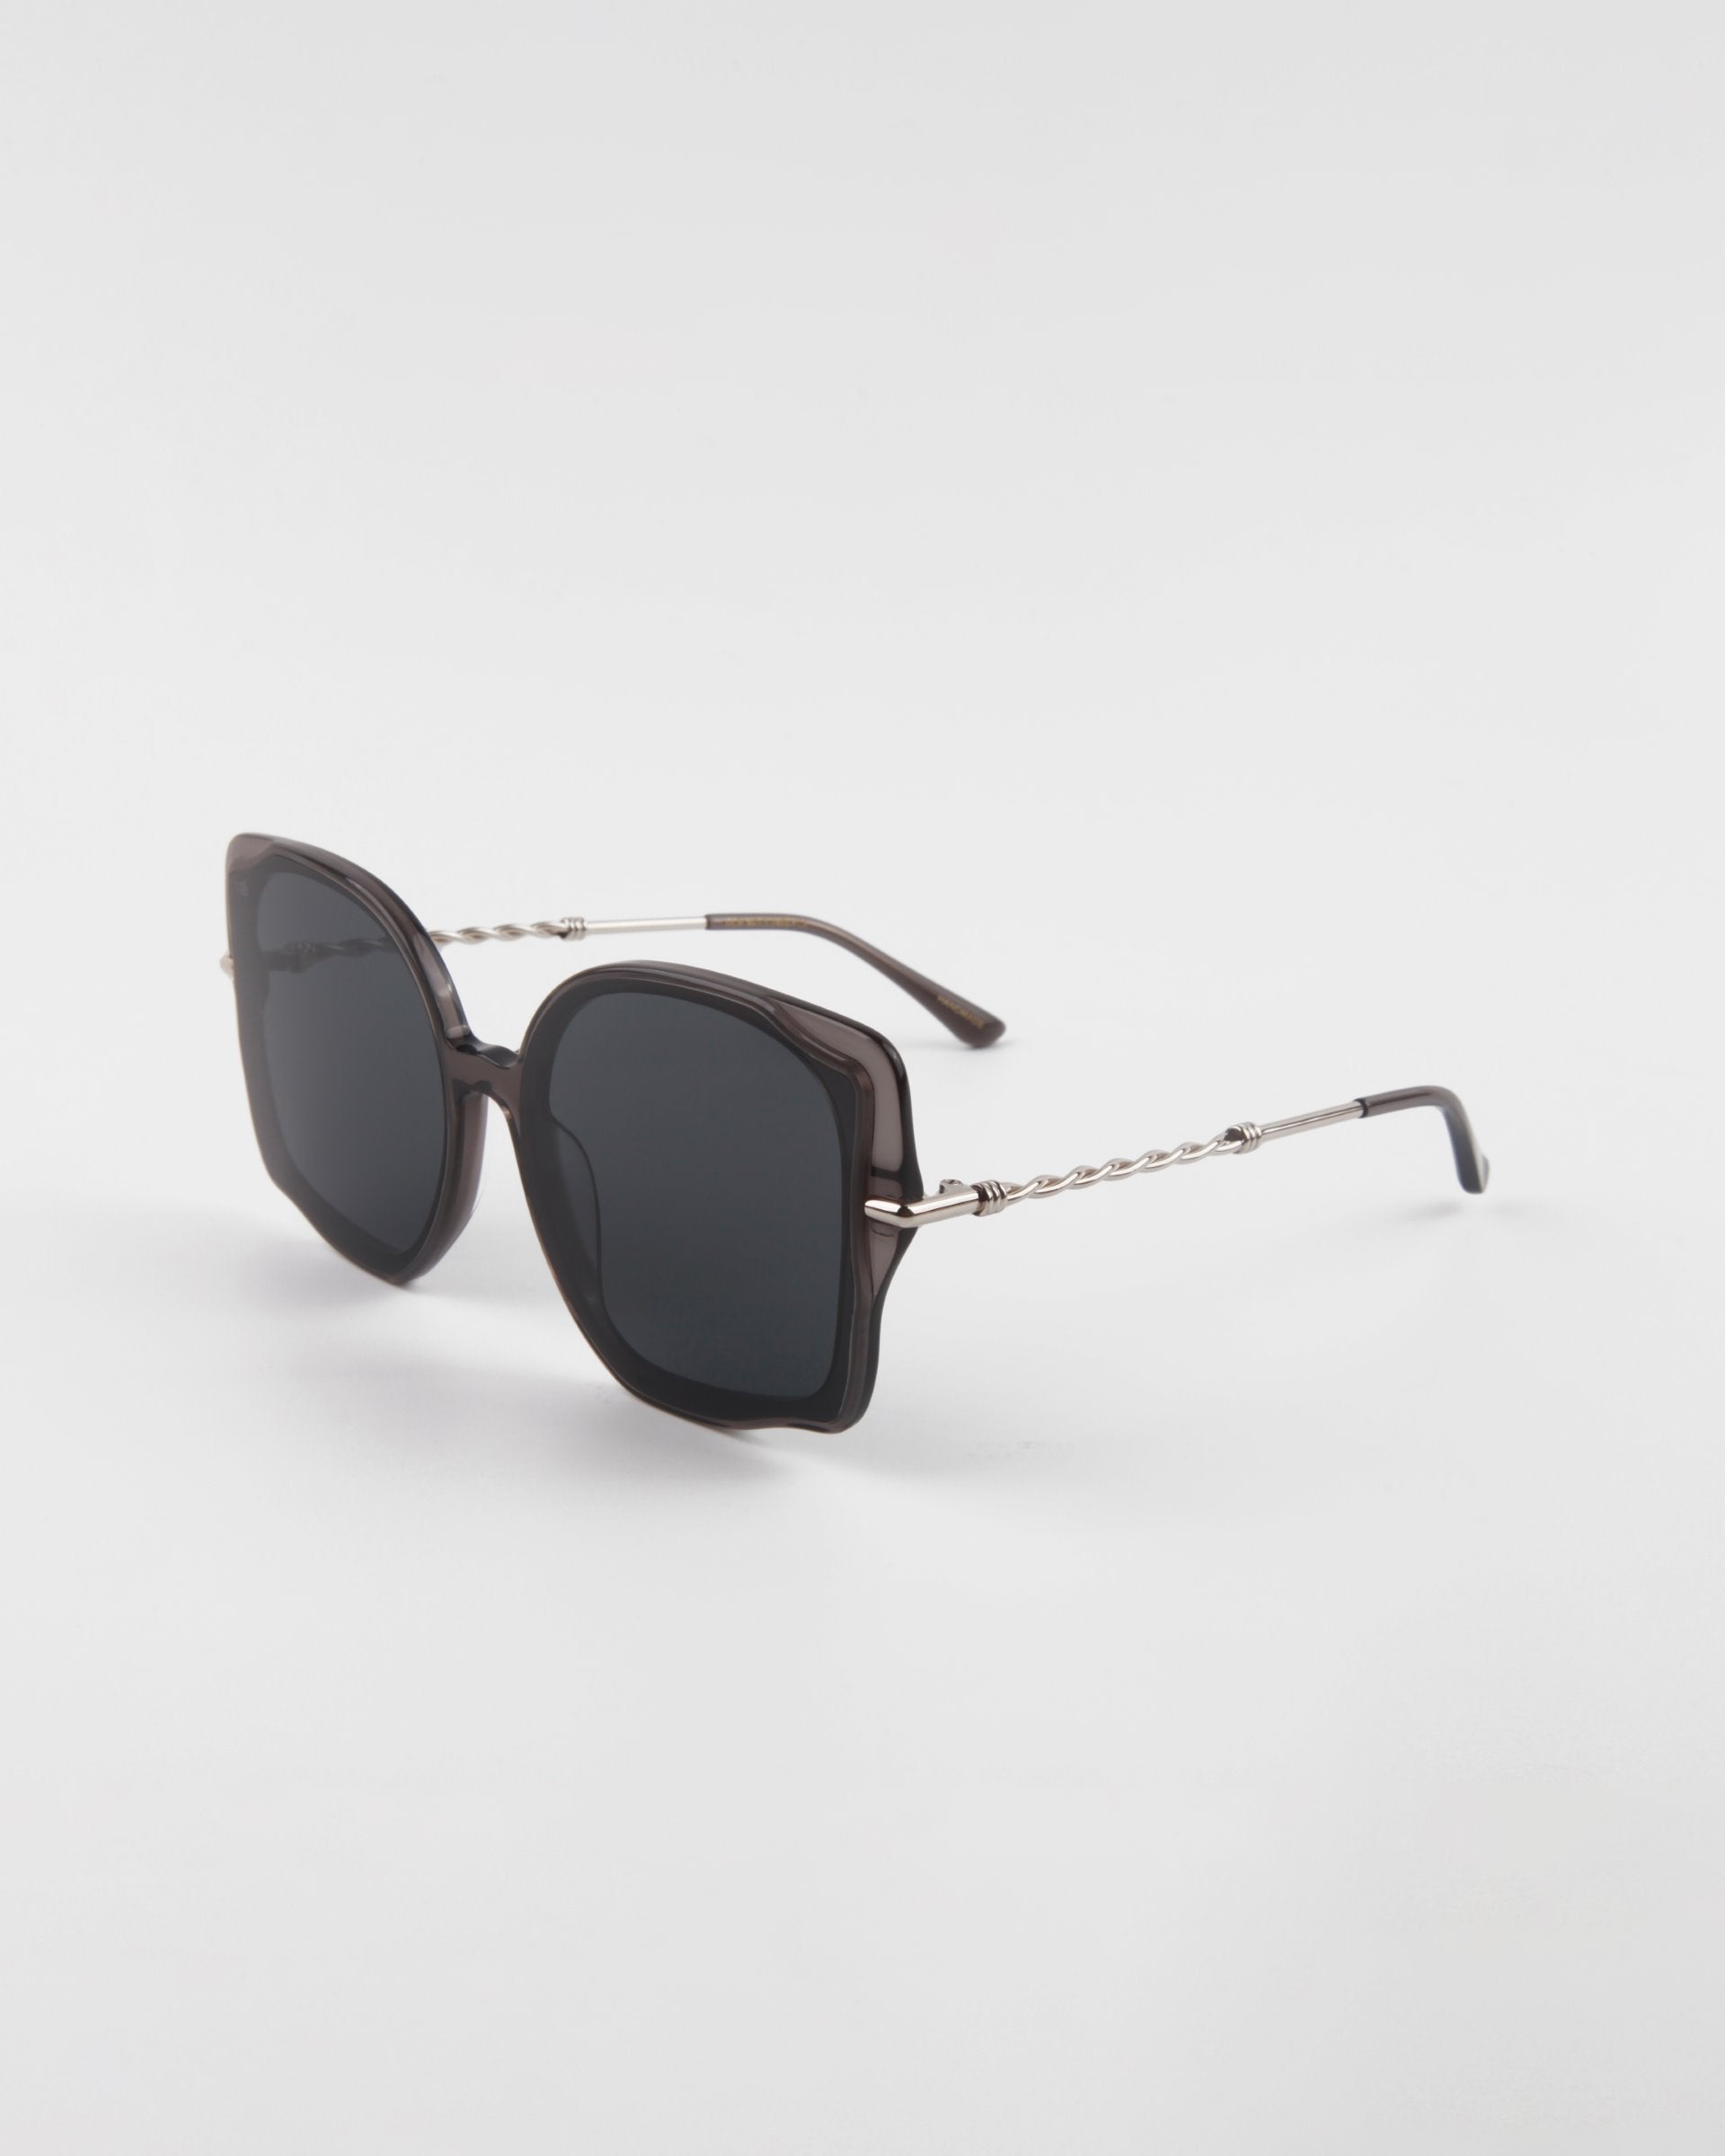 A pair of stylish, oversized square Fahrenheit sunglasses with dark lenses and thin, intricate 18-karat gold-plated arms by For Art&#39;s Sake®, isolated on a white background.